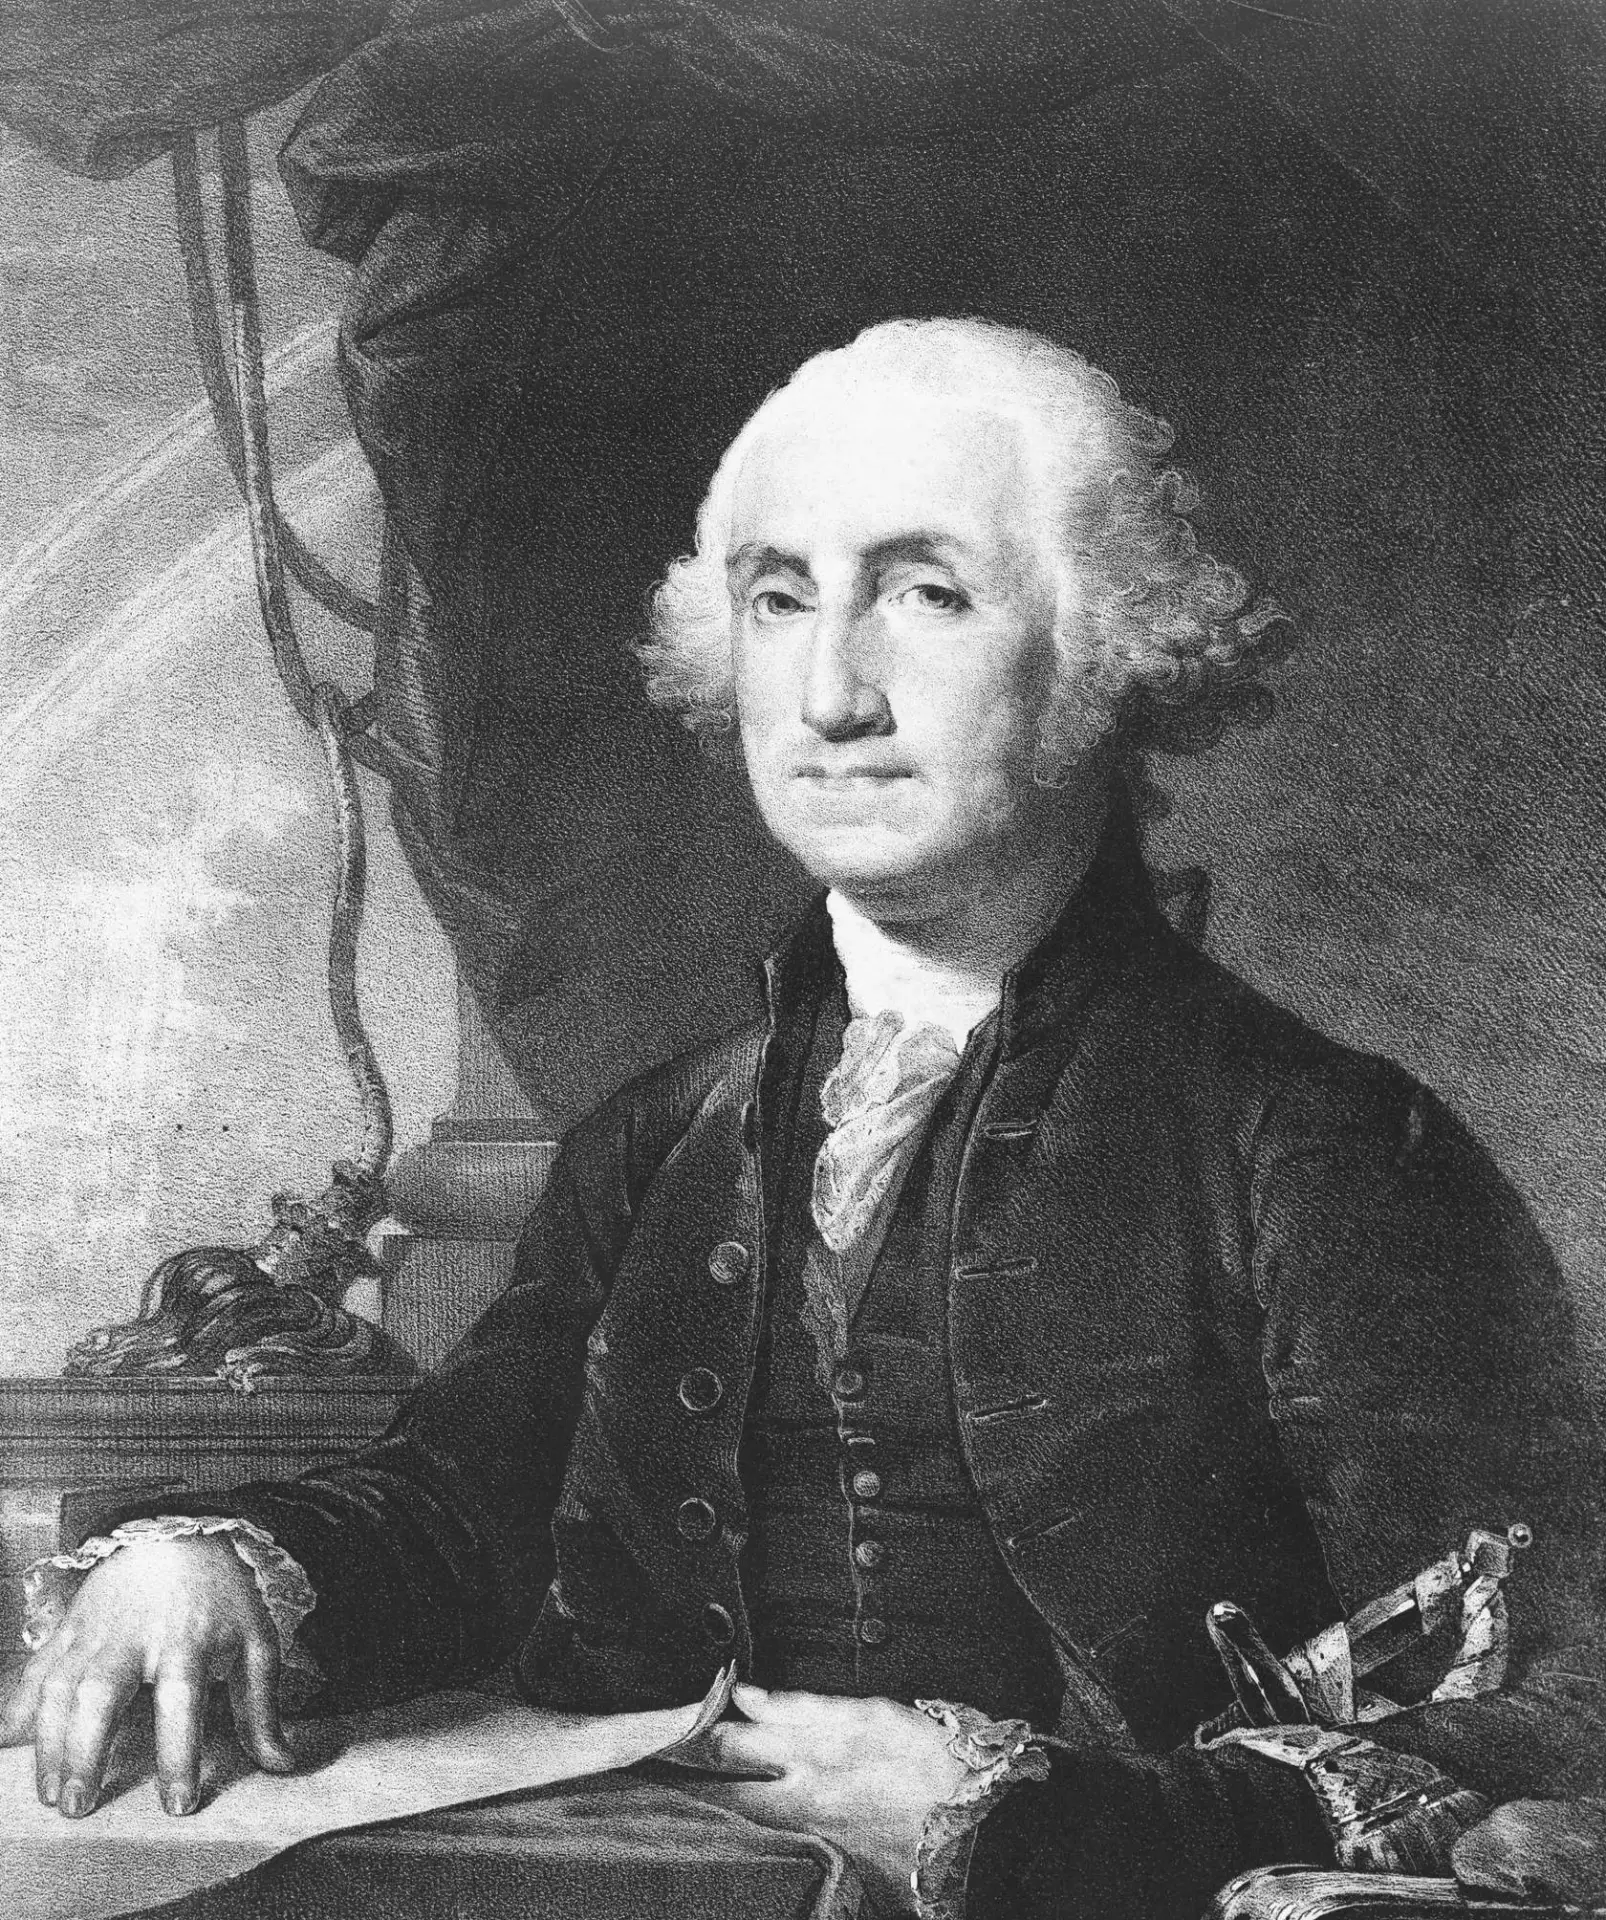 Black and white engraved portrait of George Washington sitting at a desk.